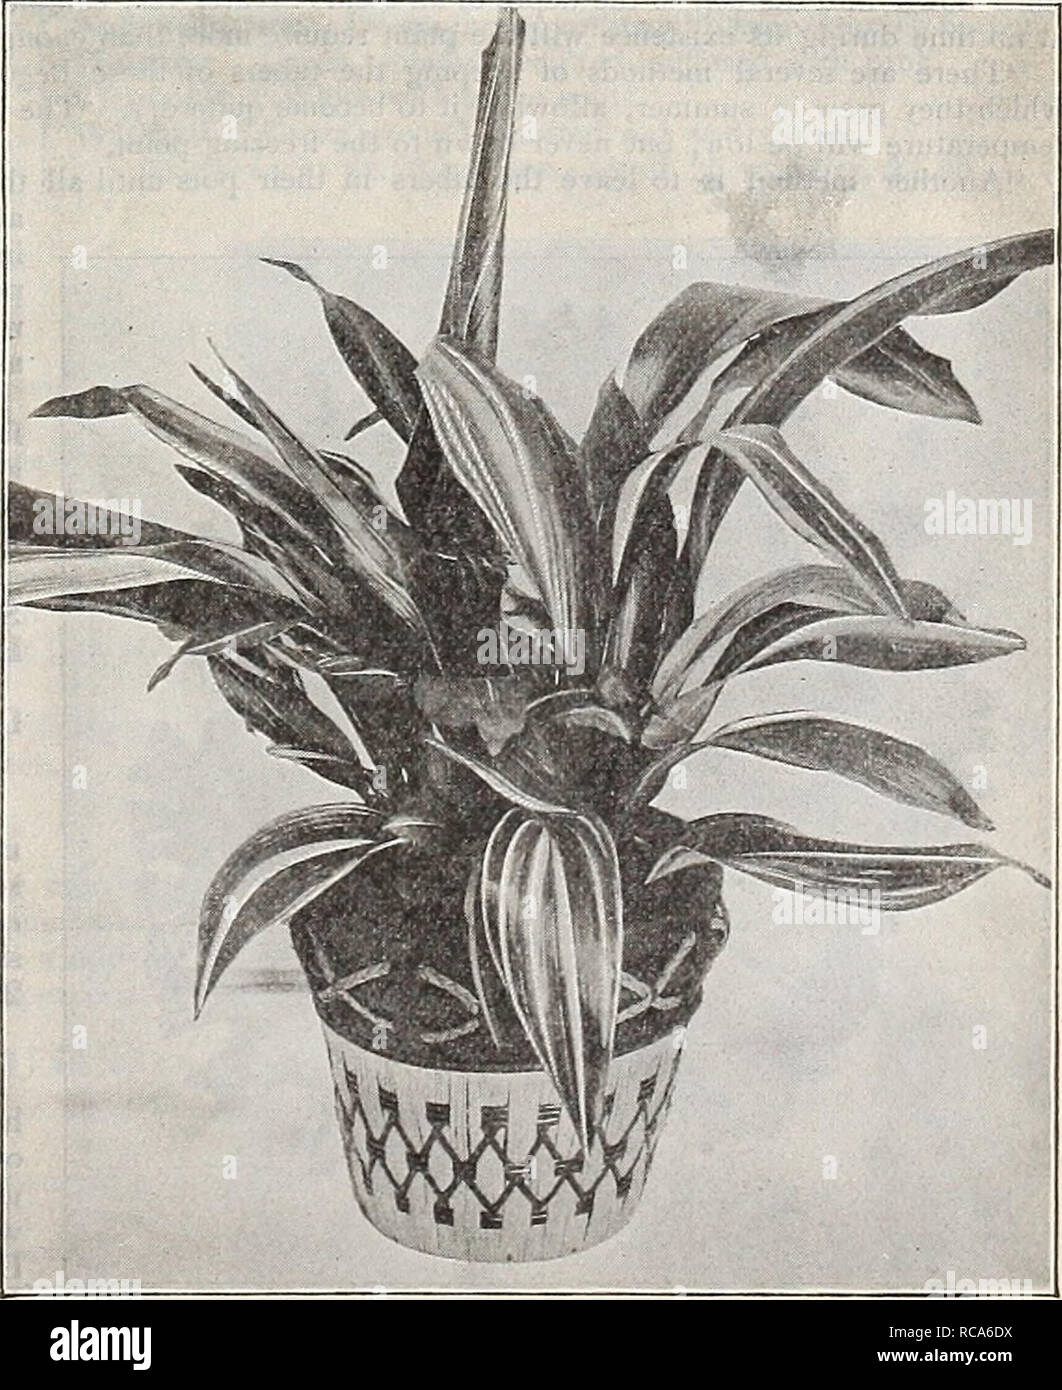 . Dreer's garden book : seventy-third annual edition 1911. Seeds Catalogs; Nursery stock Catalogs; Gardening Equipment and supplies Catalogs; Flowers Seeds Catalogs; Vegetables Seeds Catalogs; Fruit Seeds Catalogs. Fern Dish Filled with Asparagus with a Few Flowers Stuck in for Table Decoration as Suggested in Mr. Rexford's At.t;ci.e. ASPARAGUS. The following cultural notes have been written expressly for this book by Eben. E Rexford: &quot; If there is a better plant for table decoration than A. plu- mosus nanus, I do not know what it is. The foliage of this plant is more delicate than that o Stock Photo